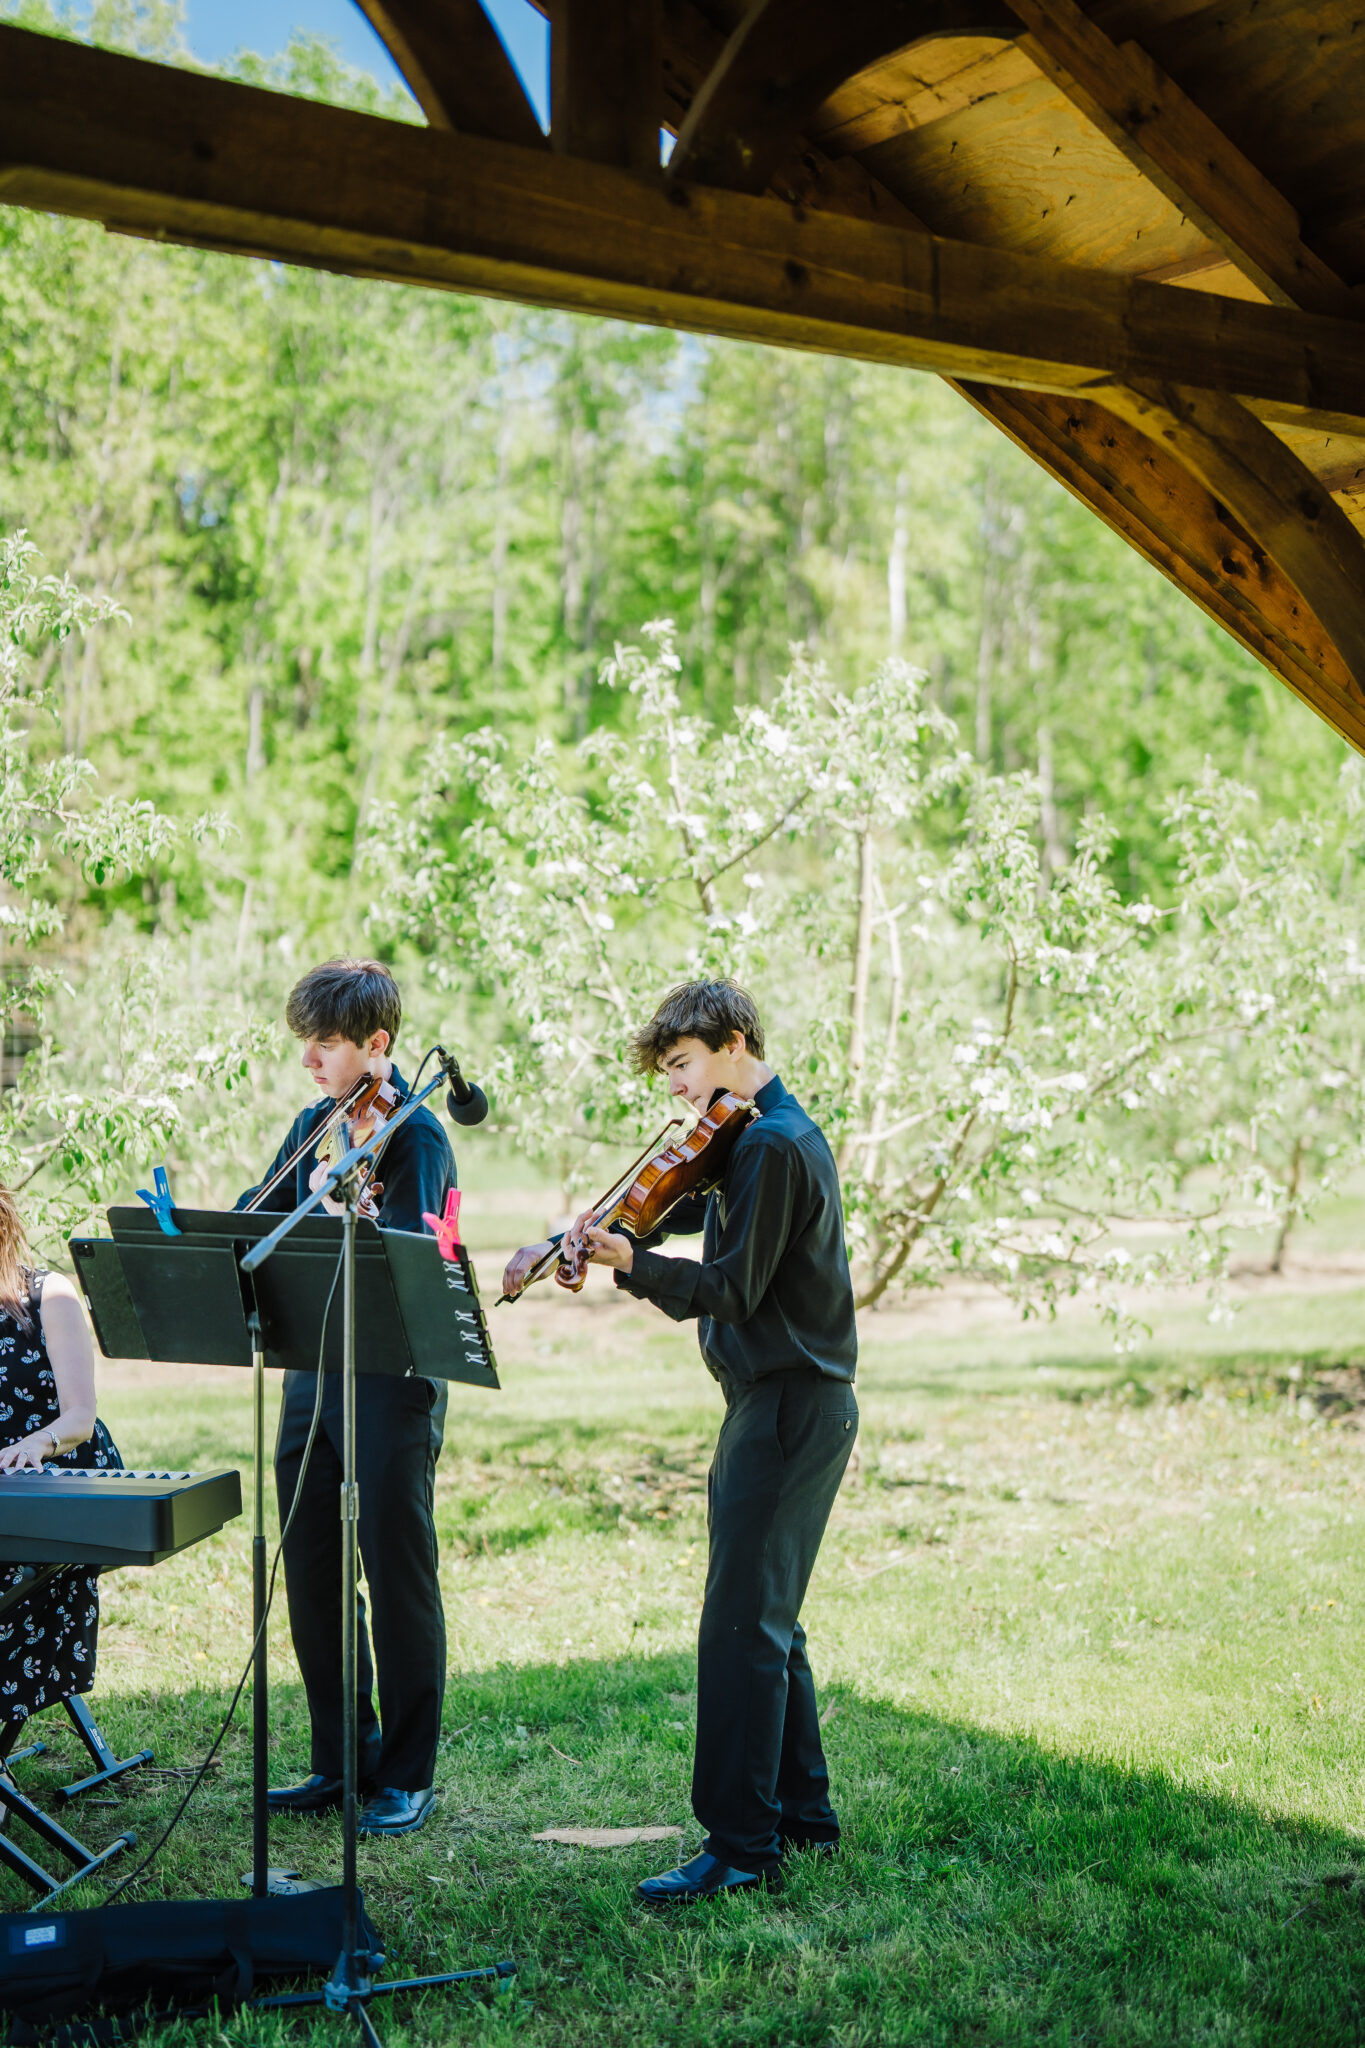 A live orchestra plays at a small wedding ceremony at Dixon Apple Orchard in Chippewa Valley, Wisconsin. Live Music Orchard Wedding Outdoor Ceremony #dixonappleorchard #orchardweddingvenue #outdoorwedding #appleorchardwedding #wisconsinweddingvenue